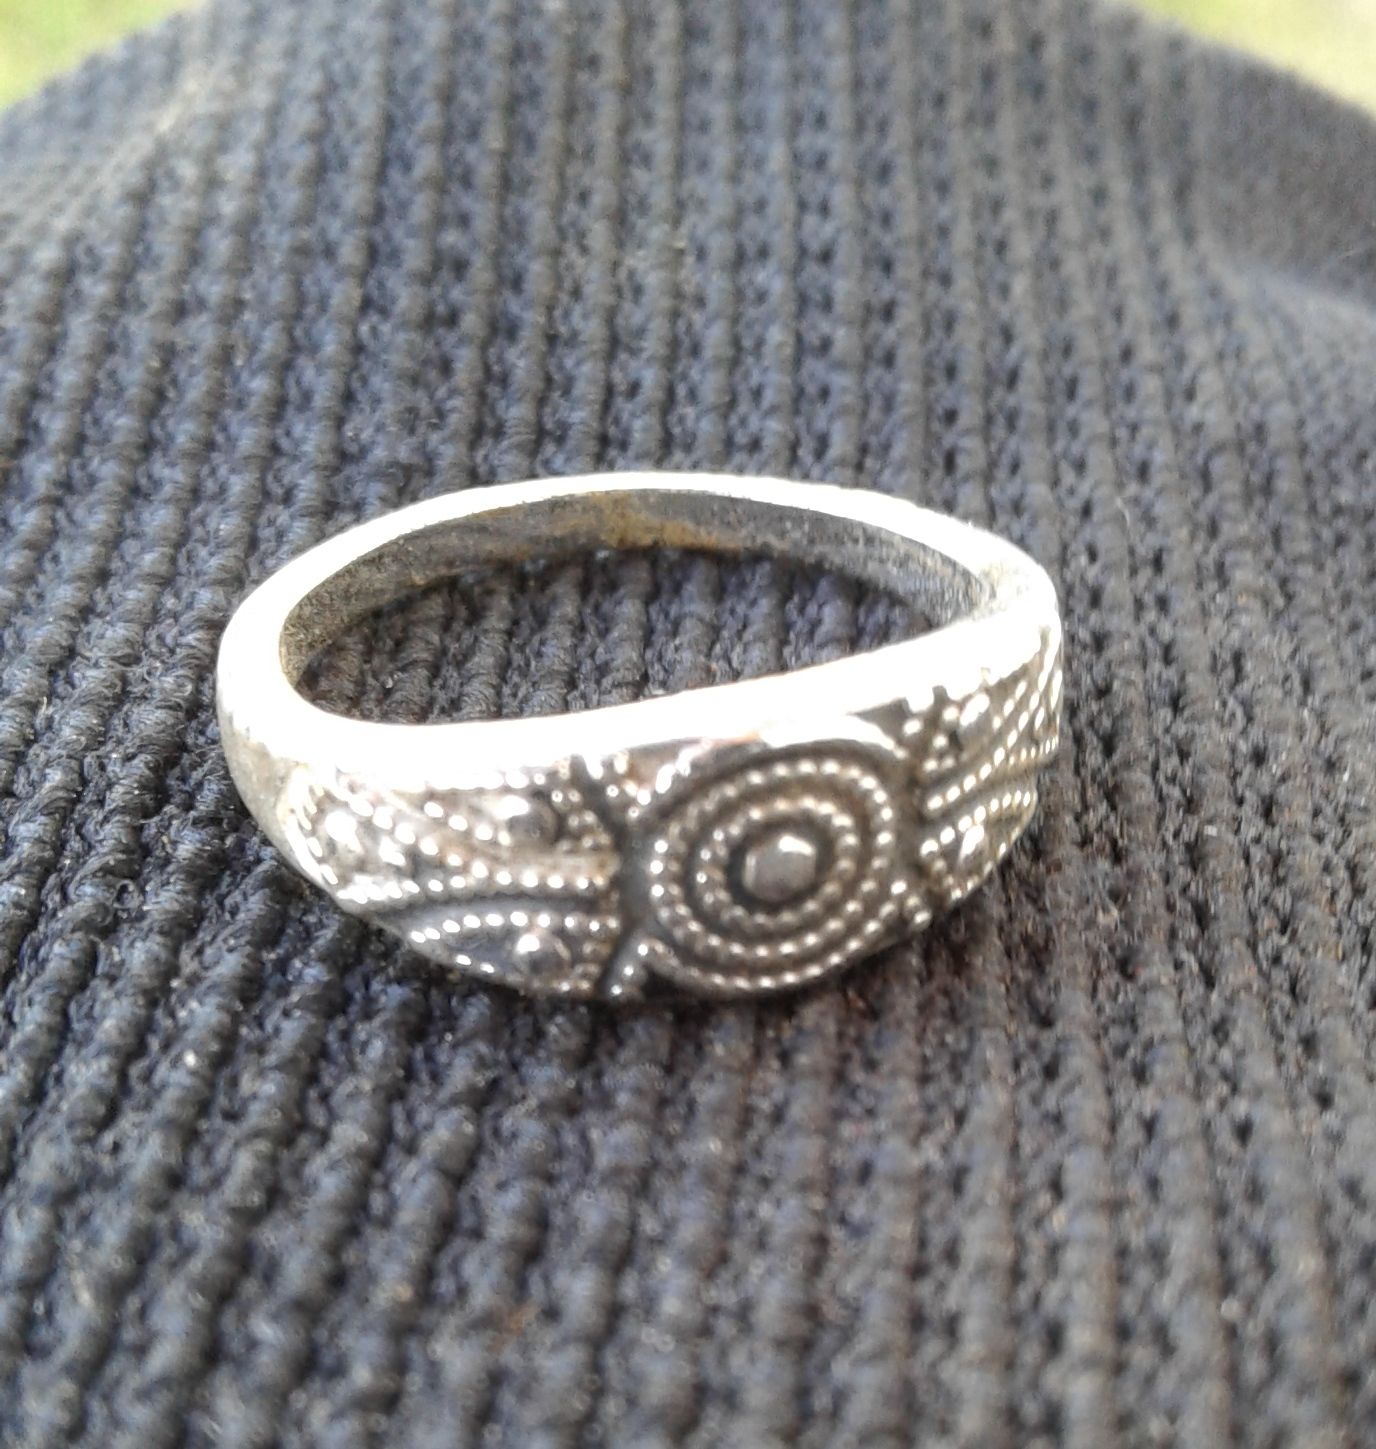 First ring I ever found and it's an Avon one for a tiny girl's finger.